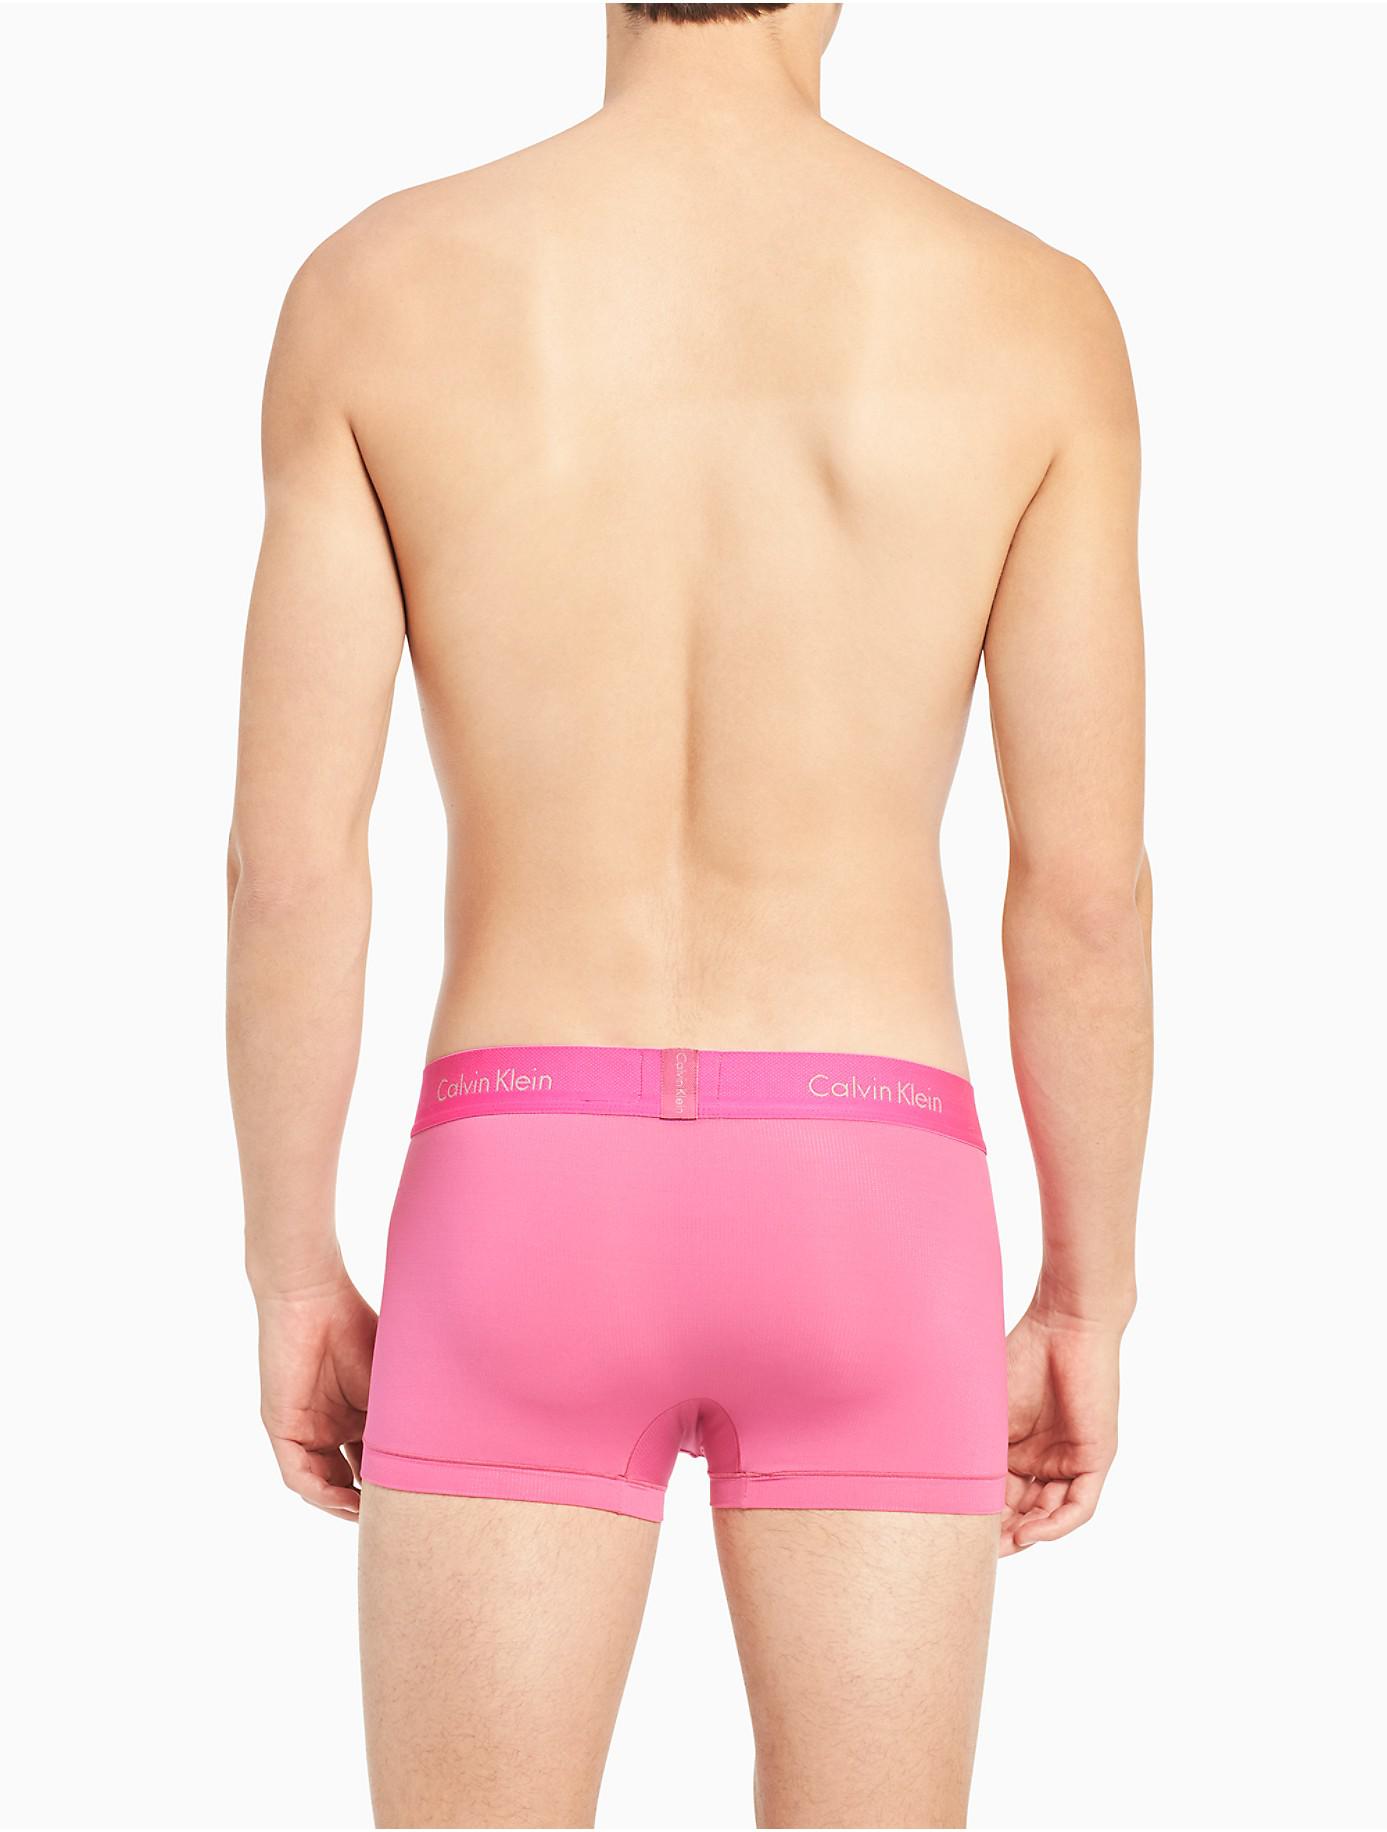 CALVIN KLEIN 205W39NYC Synthetic Light Micro Low Rise Trunk in Pink for Men  - Lyst